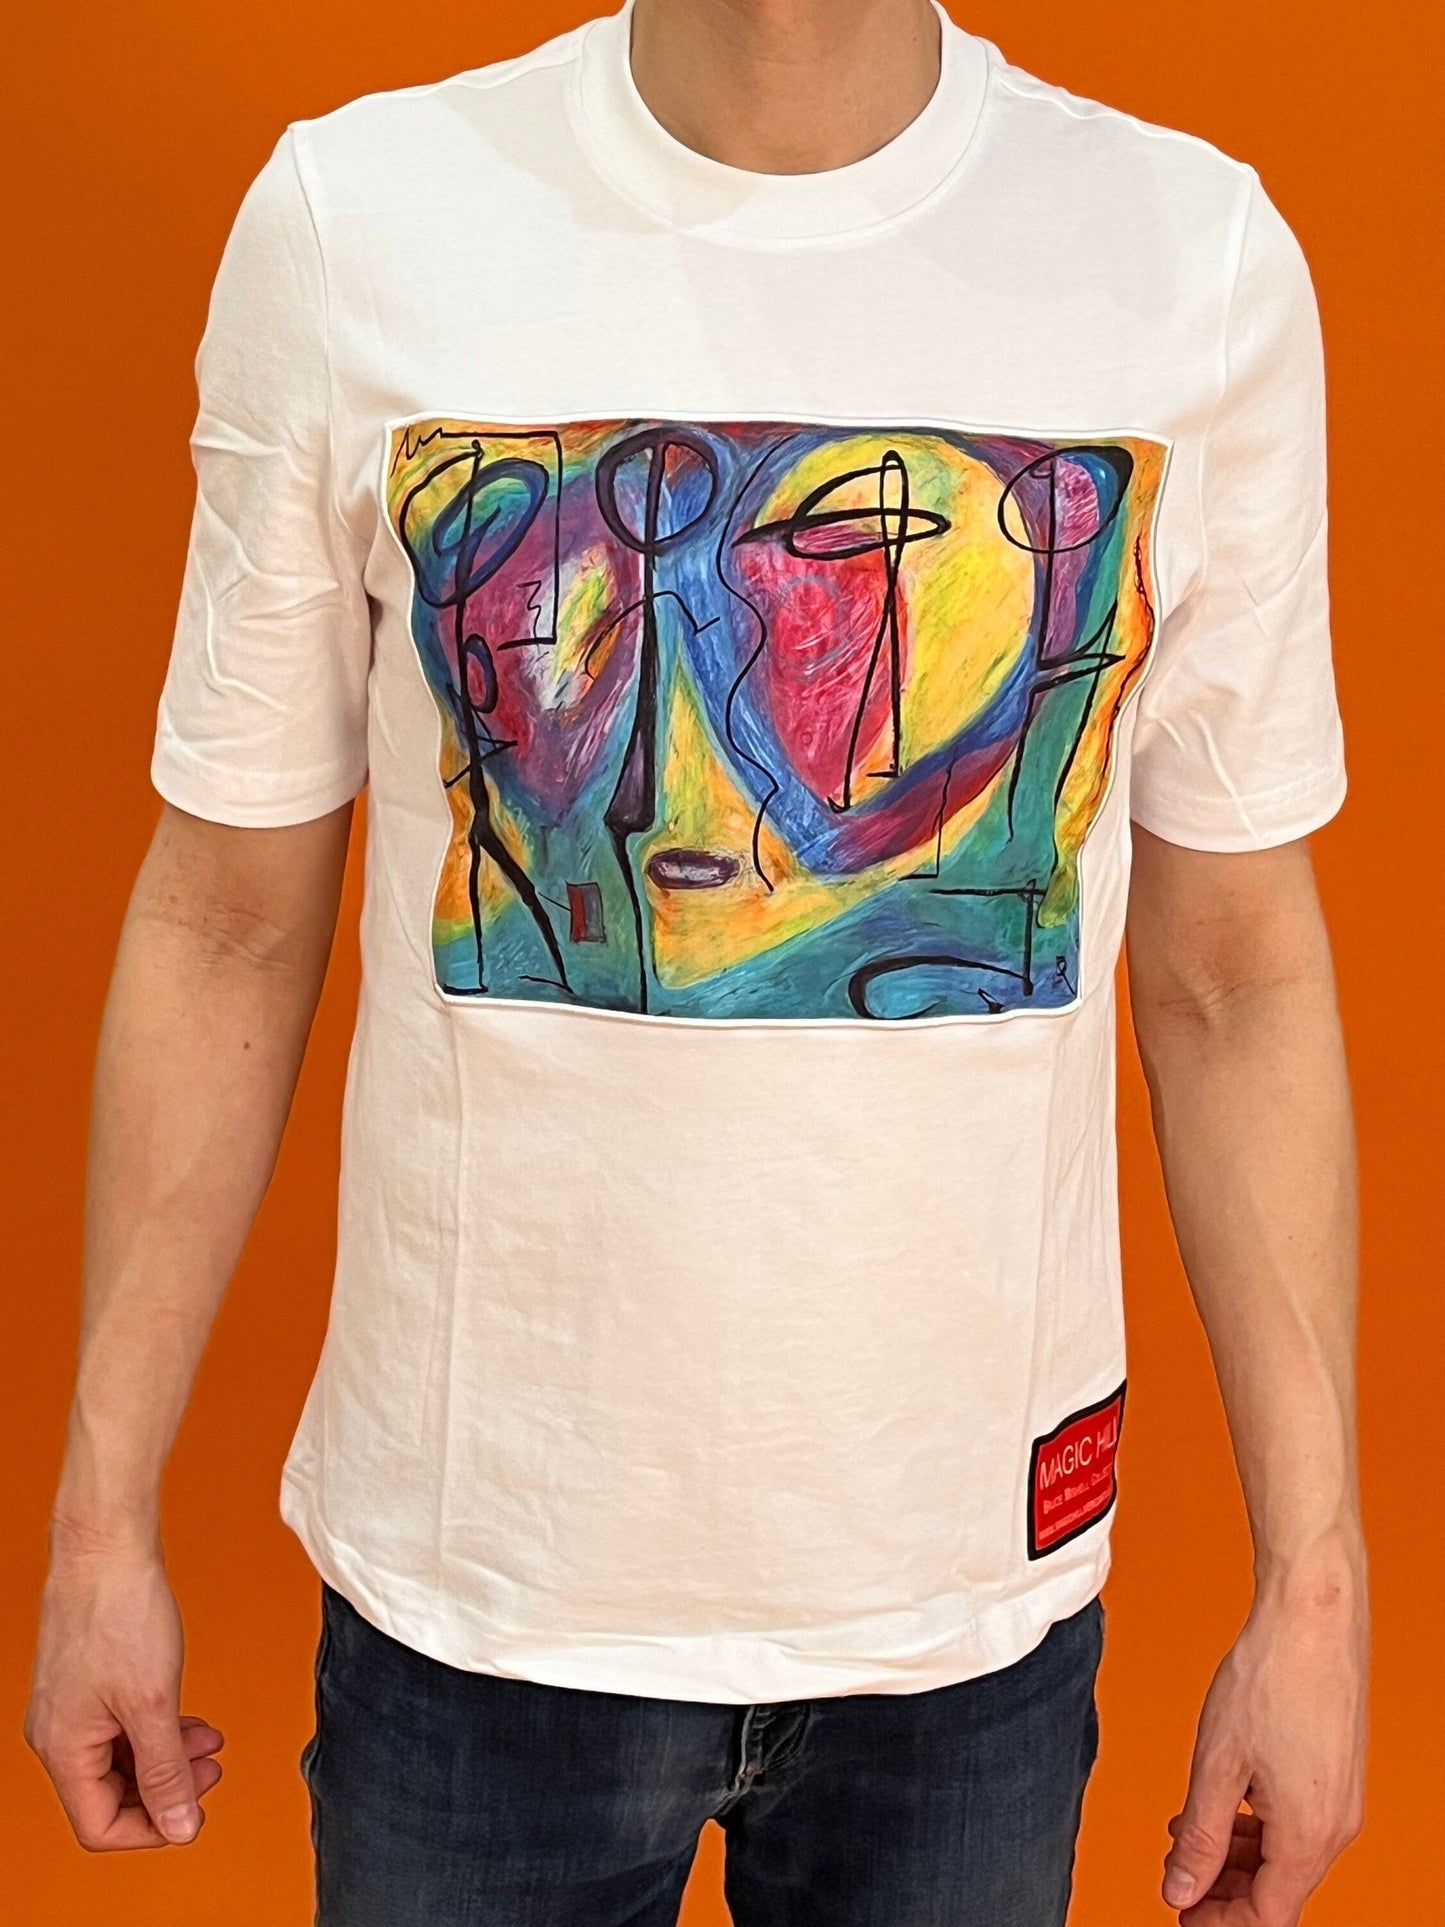 Magic Hill exclusive design with “Bruce Mishell” artwork printed on a Pima 100% cotton T-shirt